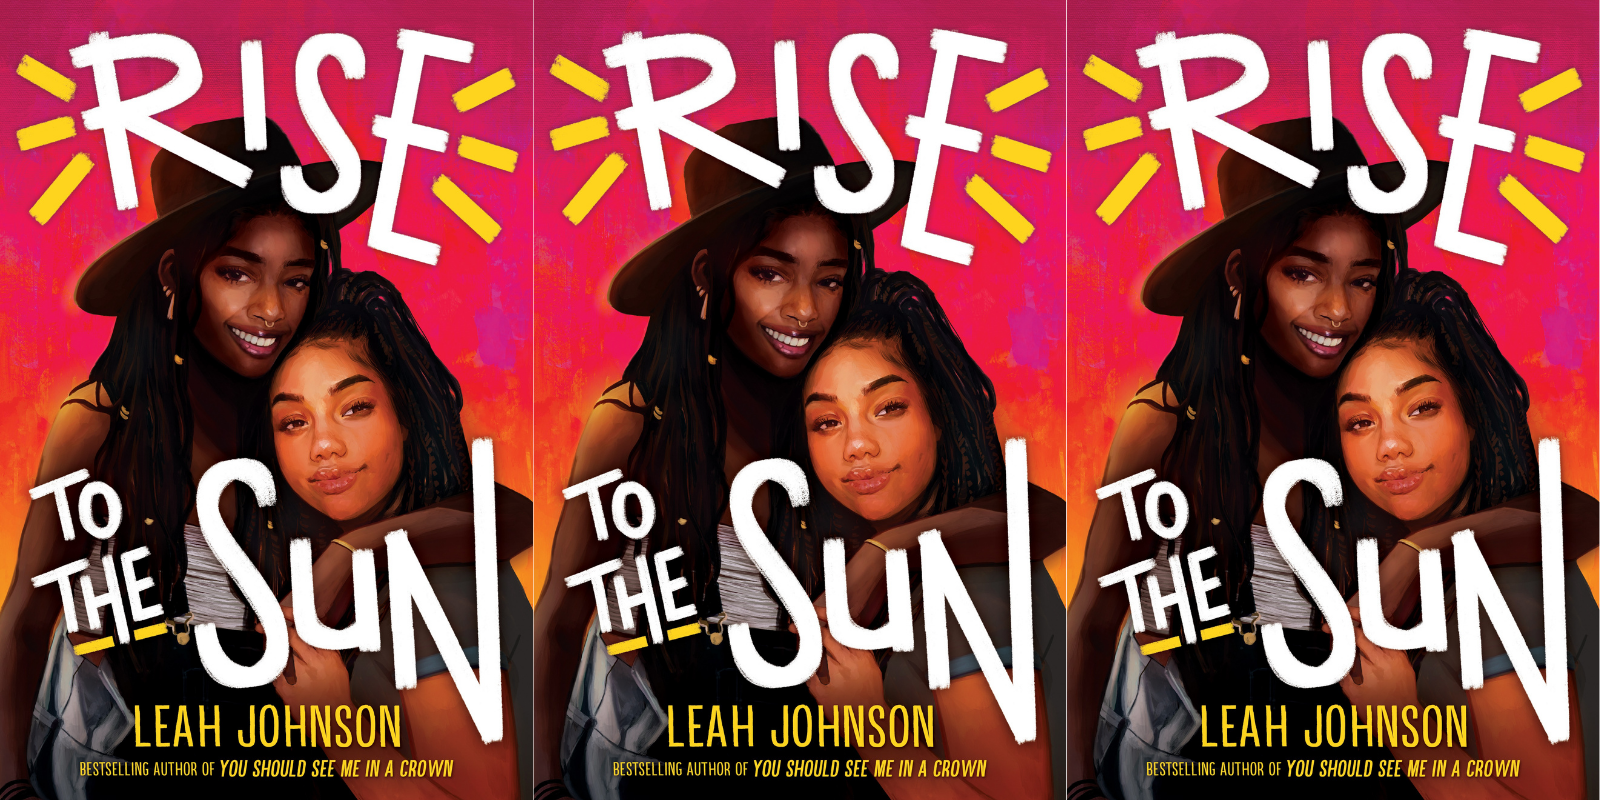 Illustrated cover of Leah Johnson's new novel, Rise to the Sun, features two Black girls holding each other and smiling against a red background.